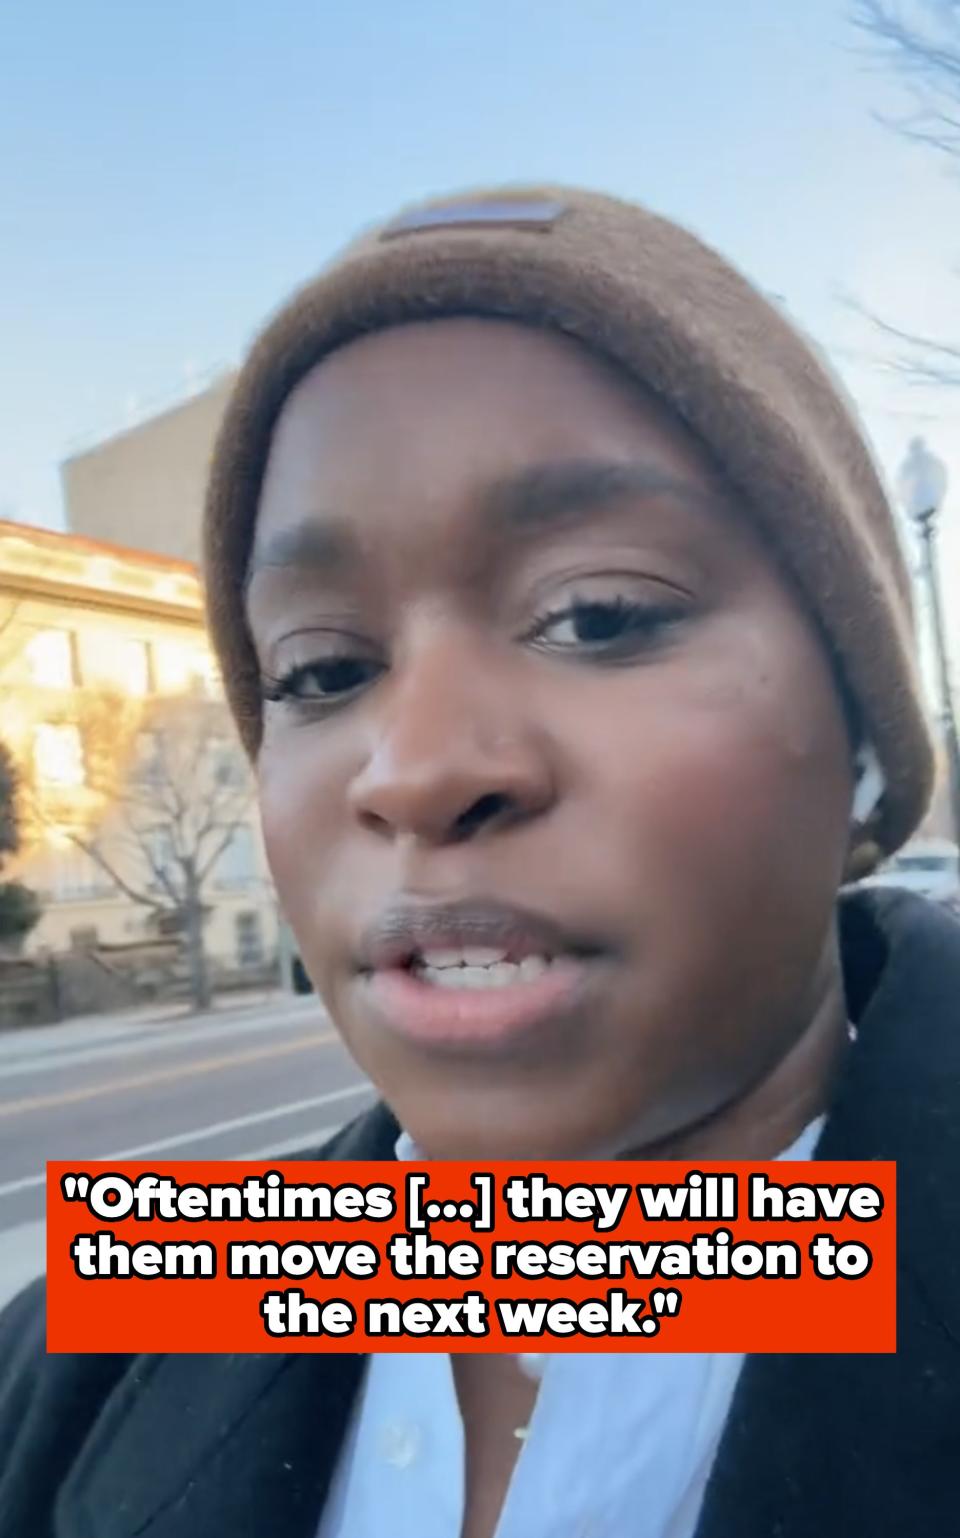 imani speaks to camera with a text overlay about moving a reservation to the next week